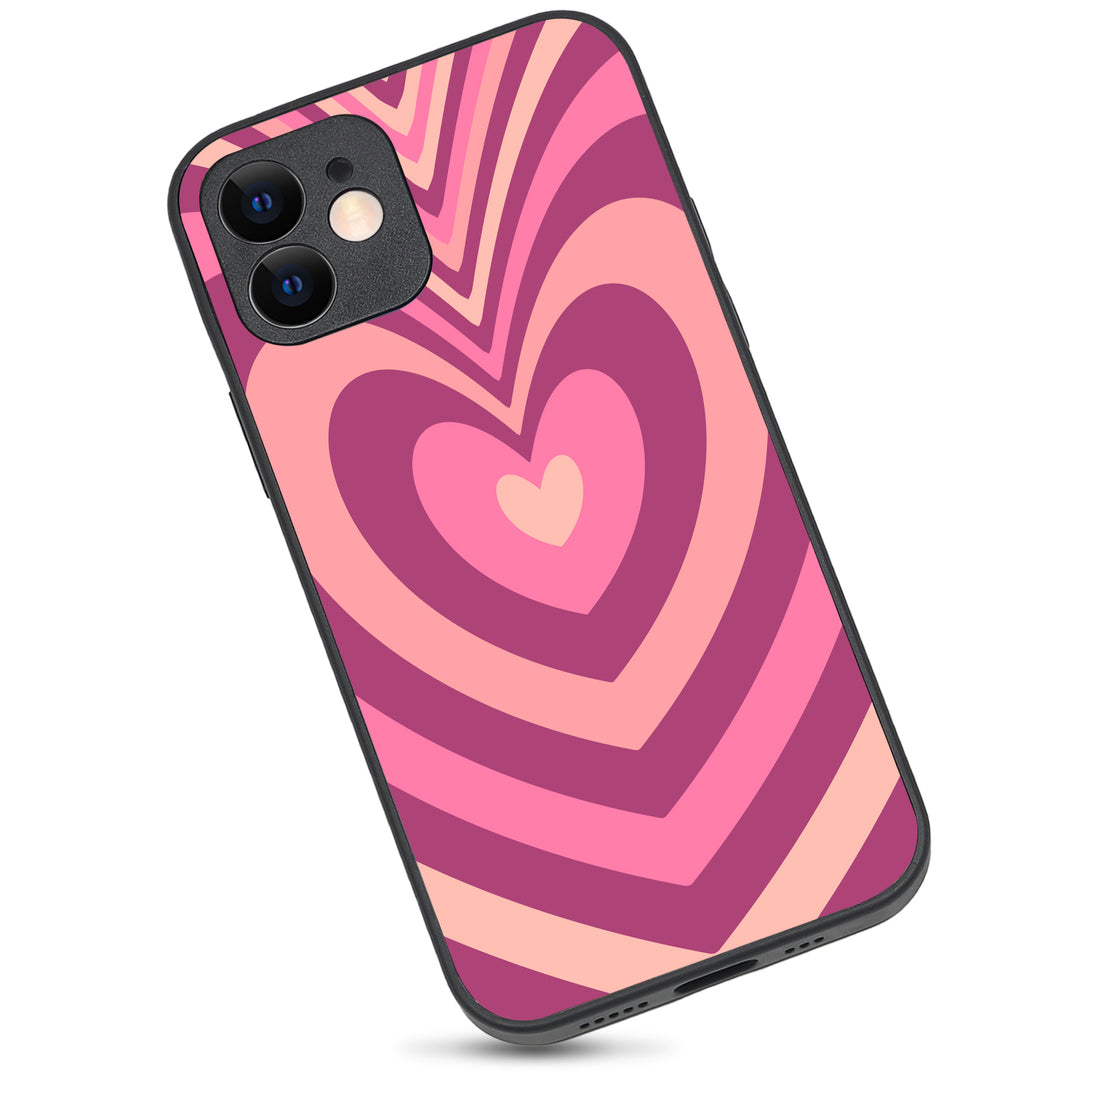 Pink Heart Optical Illusion iPhone 12 Case